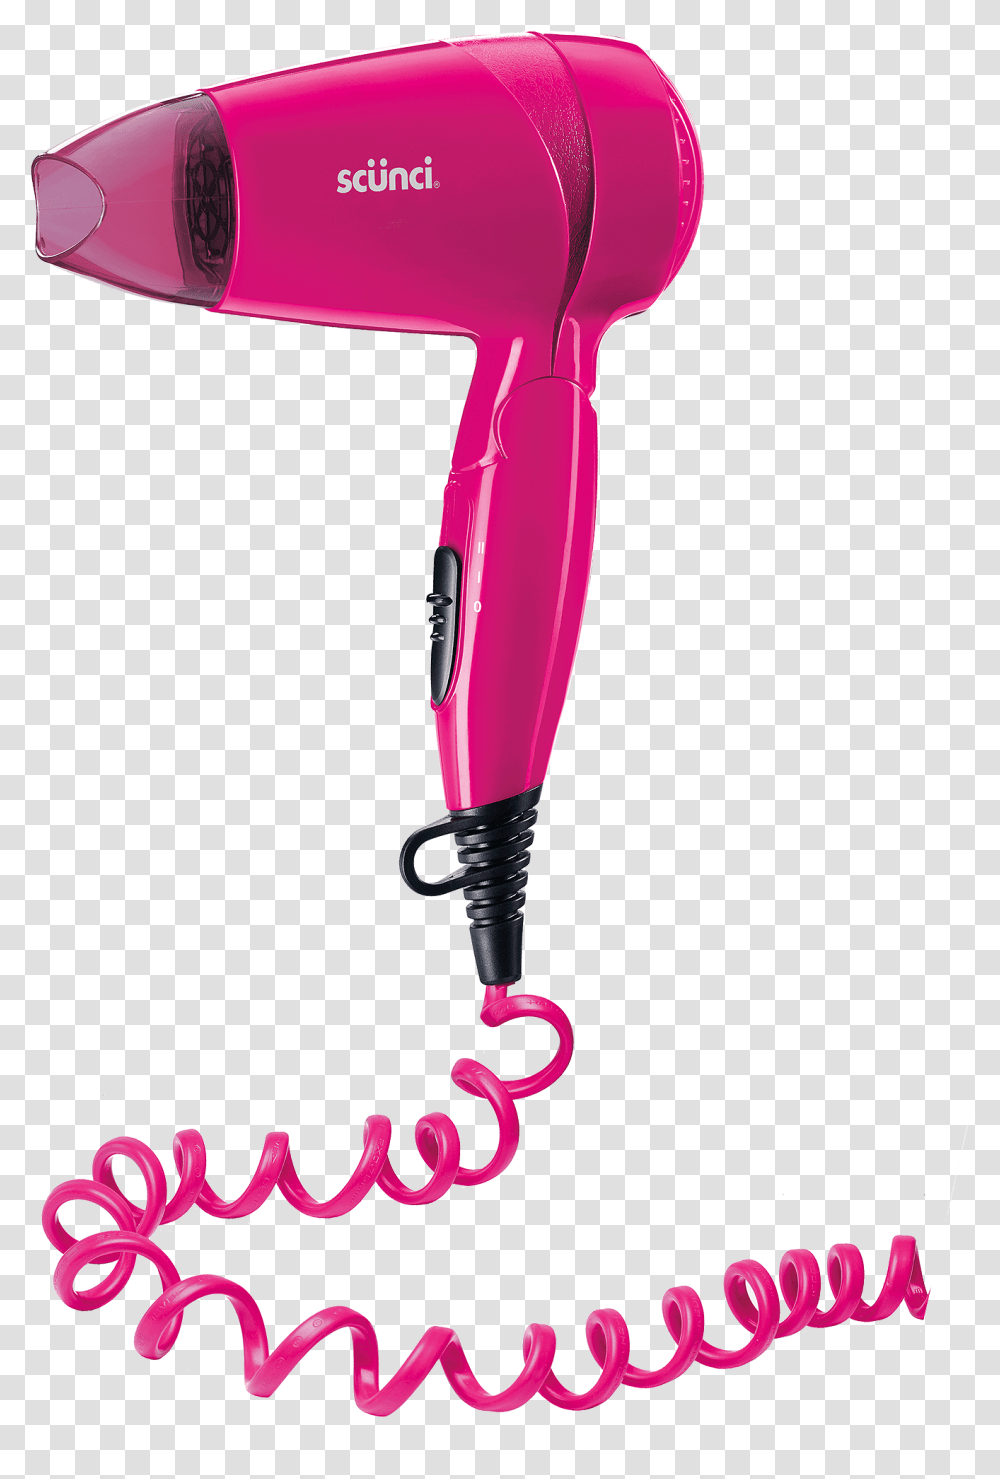 Curly Cord Compact Hair Dryer Blow Dryer With Long Cable, Appliance, Hair Drier,  Transparent Png